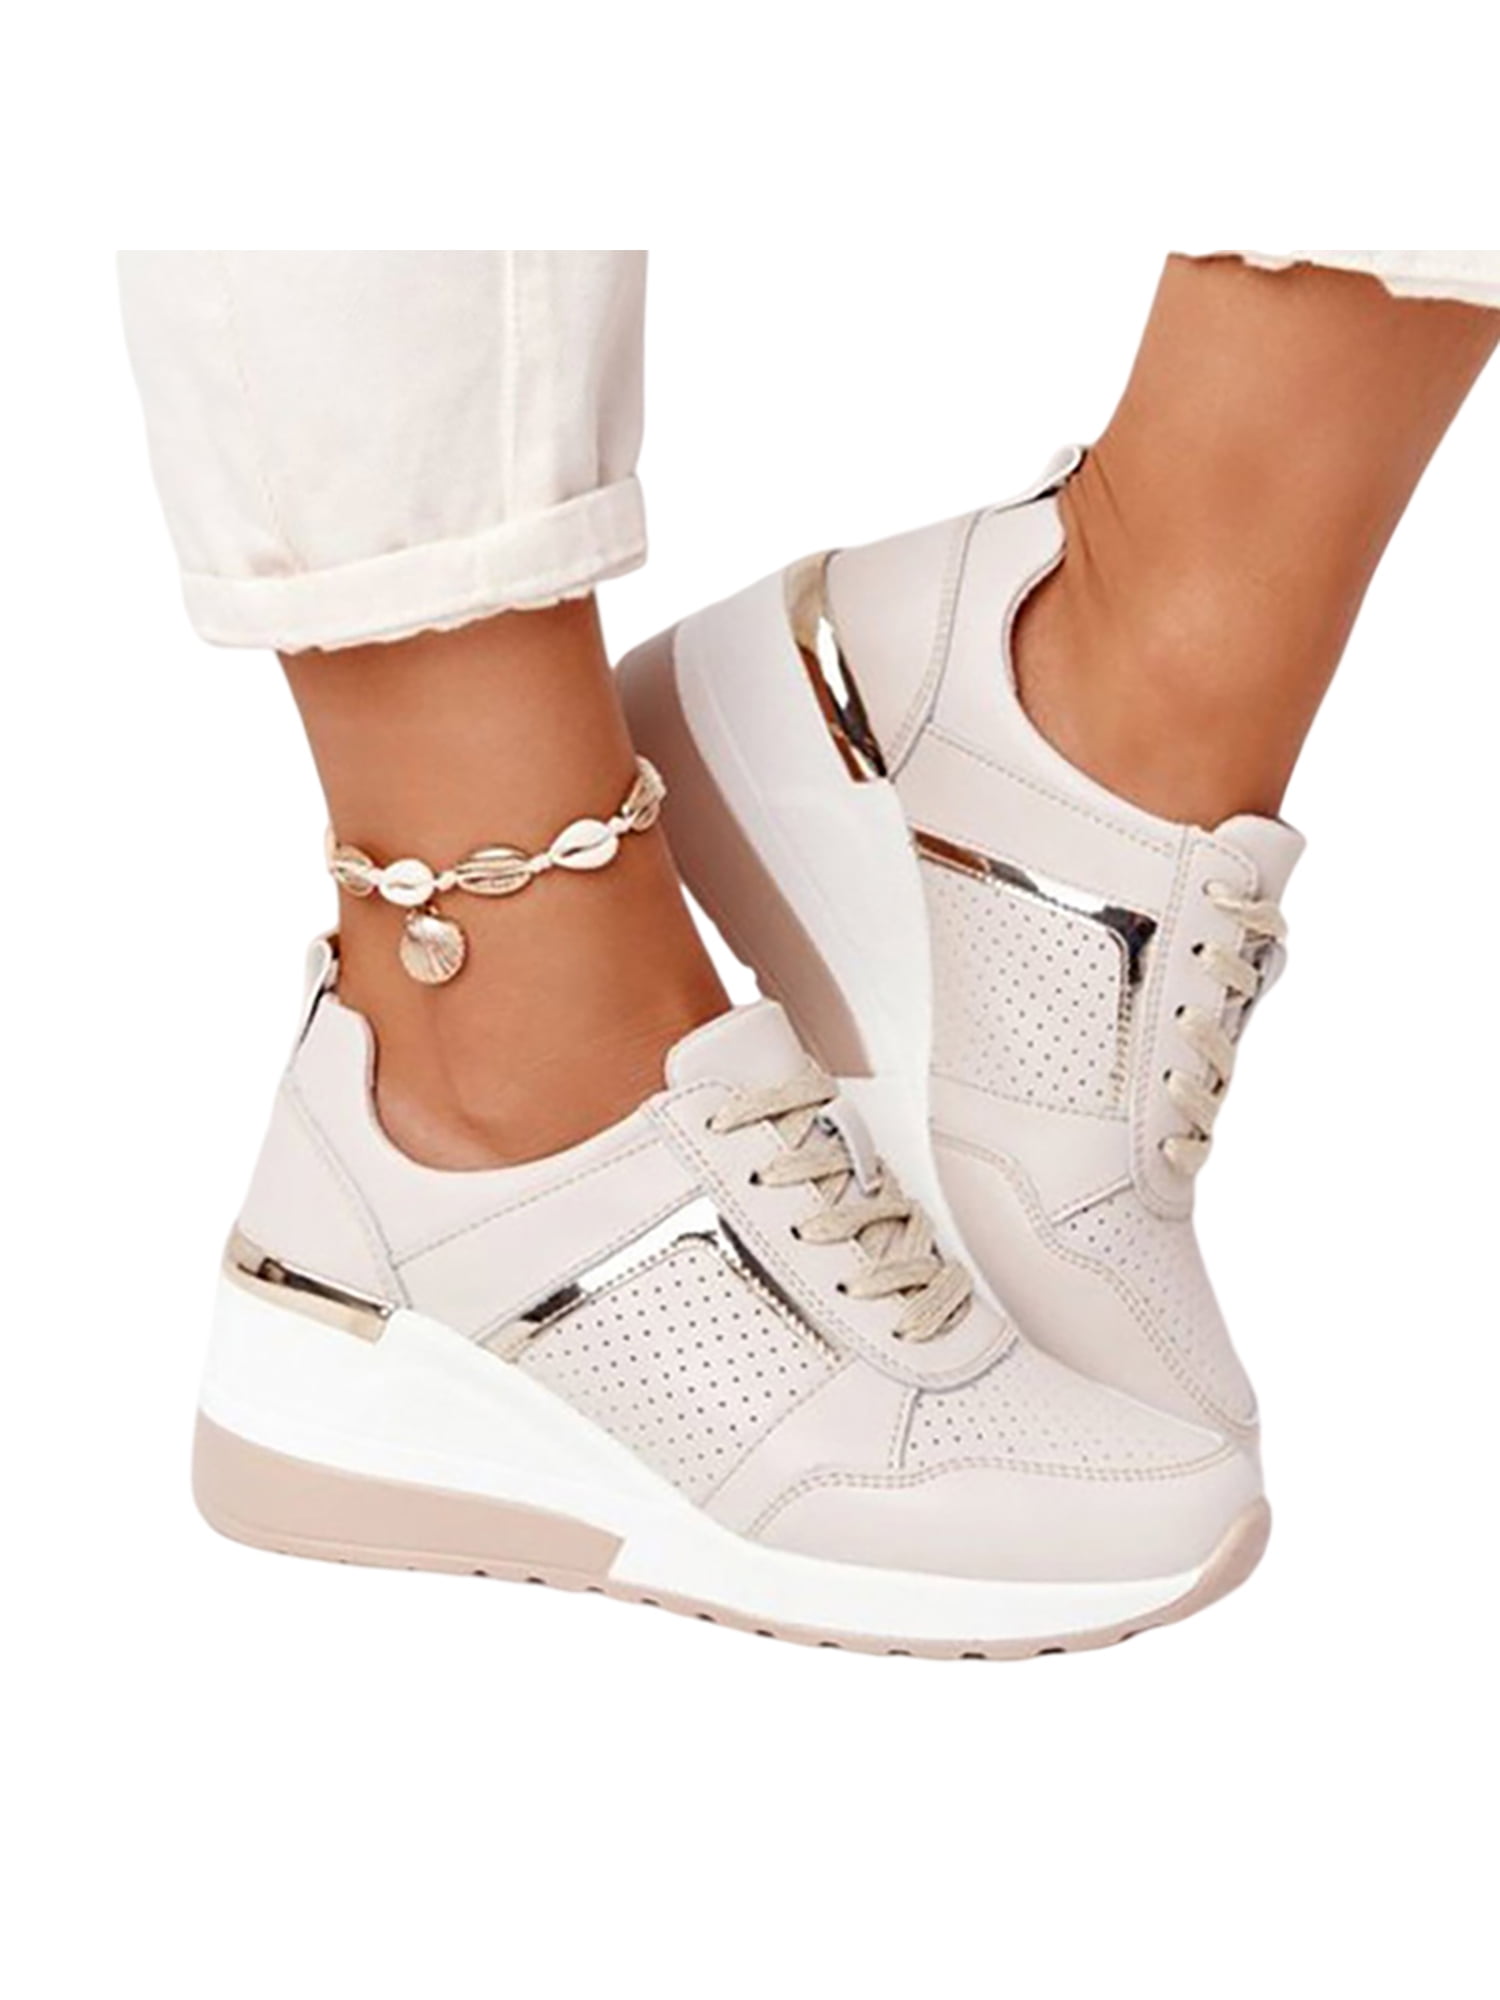 Womens Fashion Sneakers Lace Up Hidden Wedge Heel Platform Trainer Tennis Shoes 